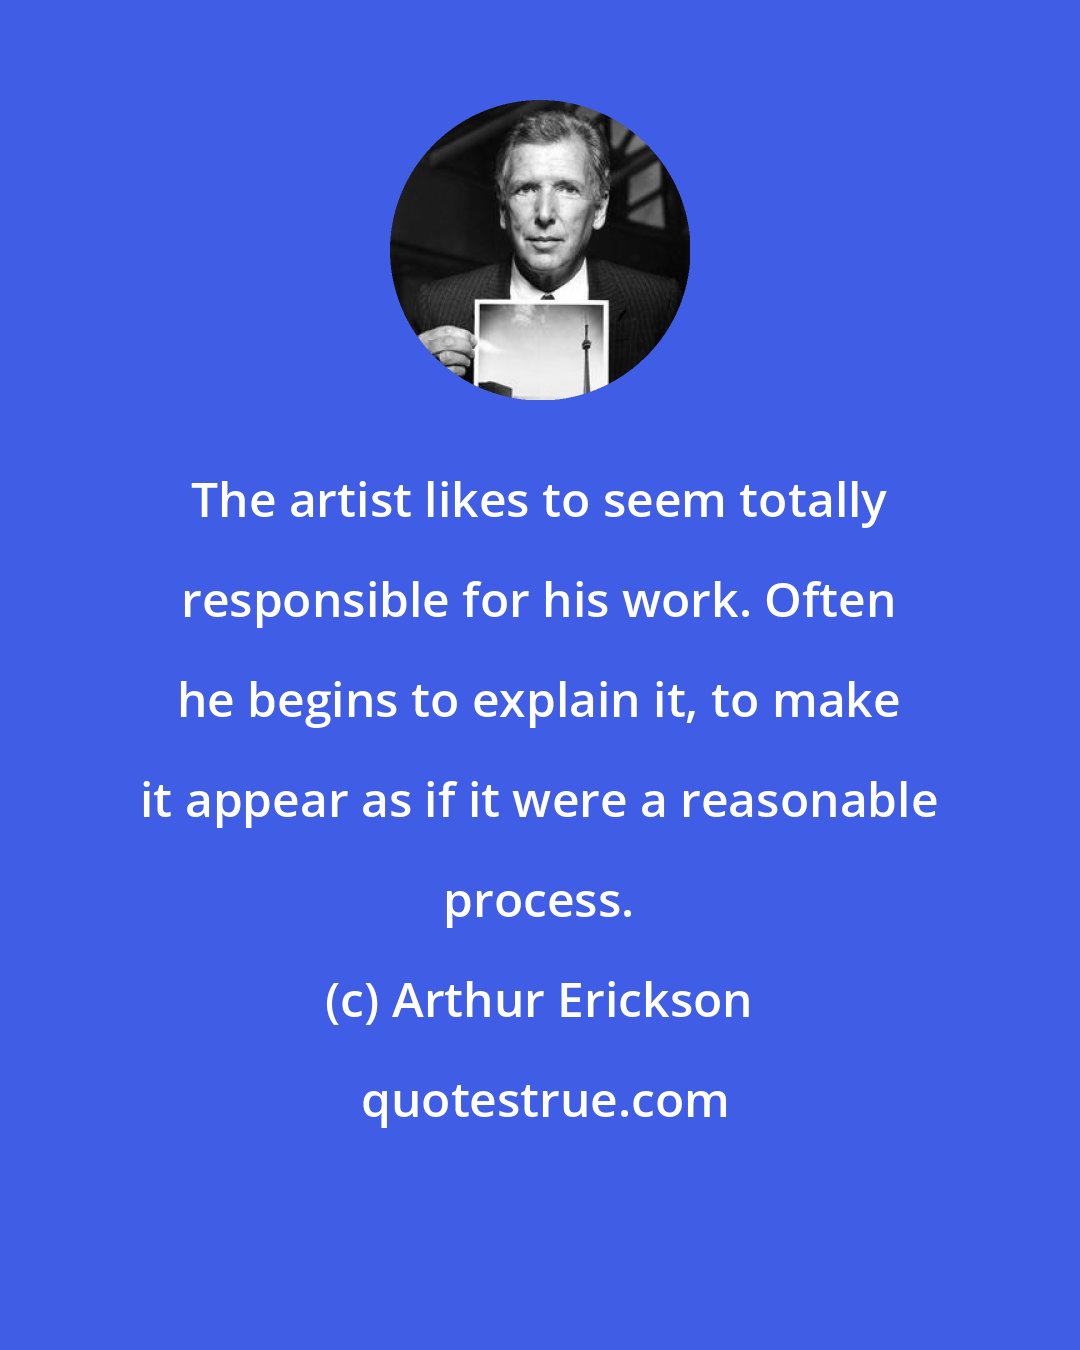 Arthur Erickson: The artist likes to seem totally responsible for his work. Often he begins to explain it, to make it appear as if it were a reasonable process.